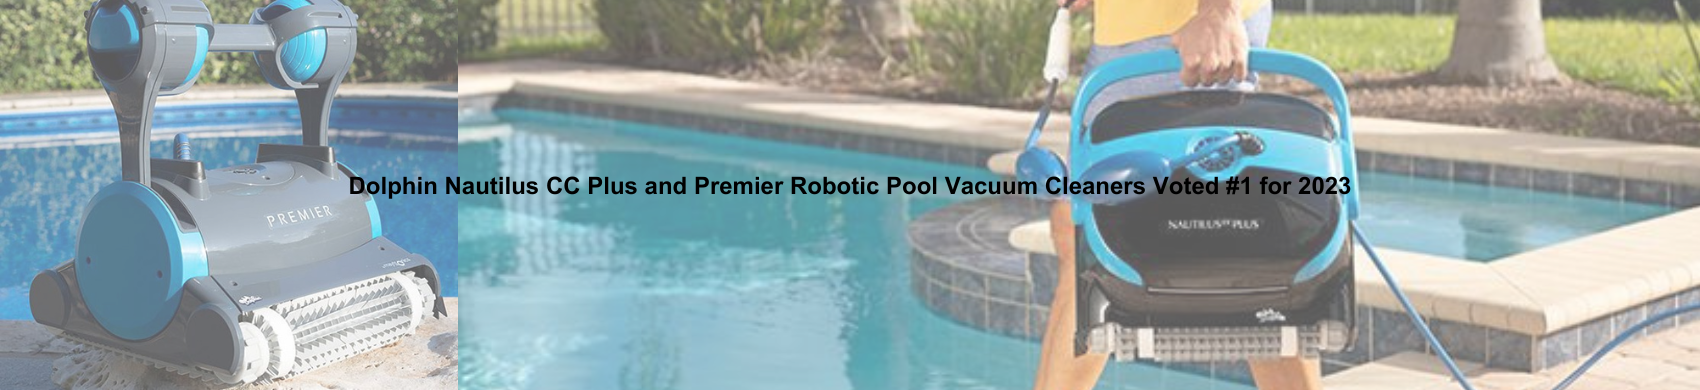 Dolphin Nautilus CC Plus and Premier Robotic Pool Vacuum Cleaners Secure Top Ranking in 2023